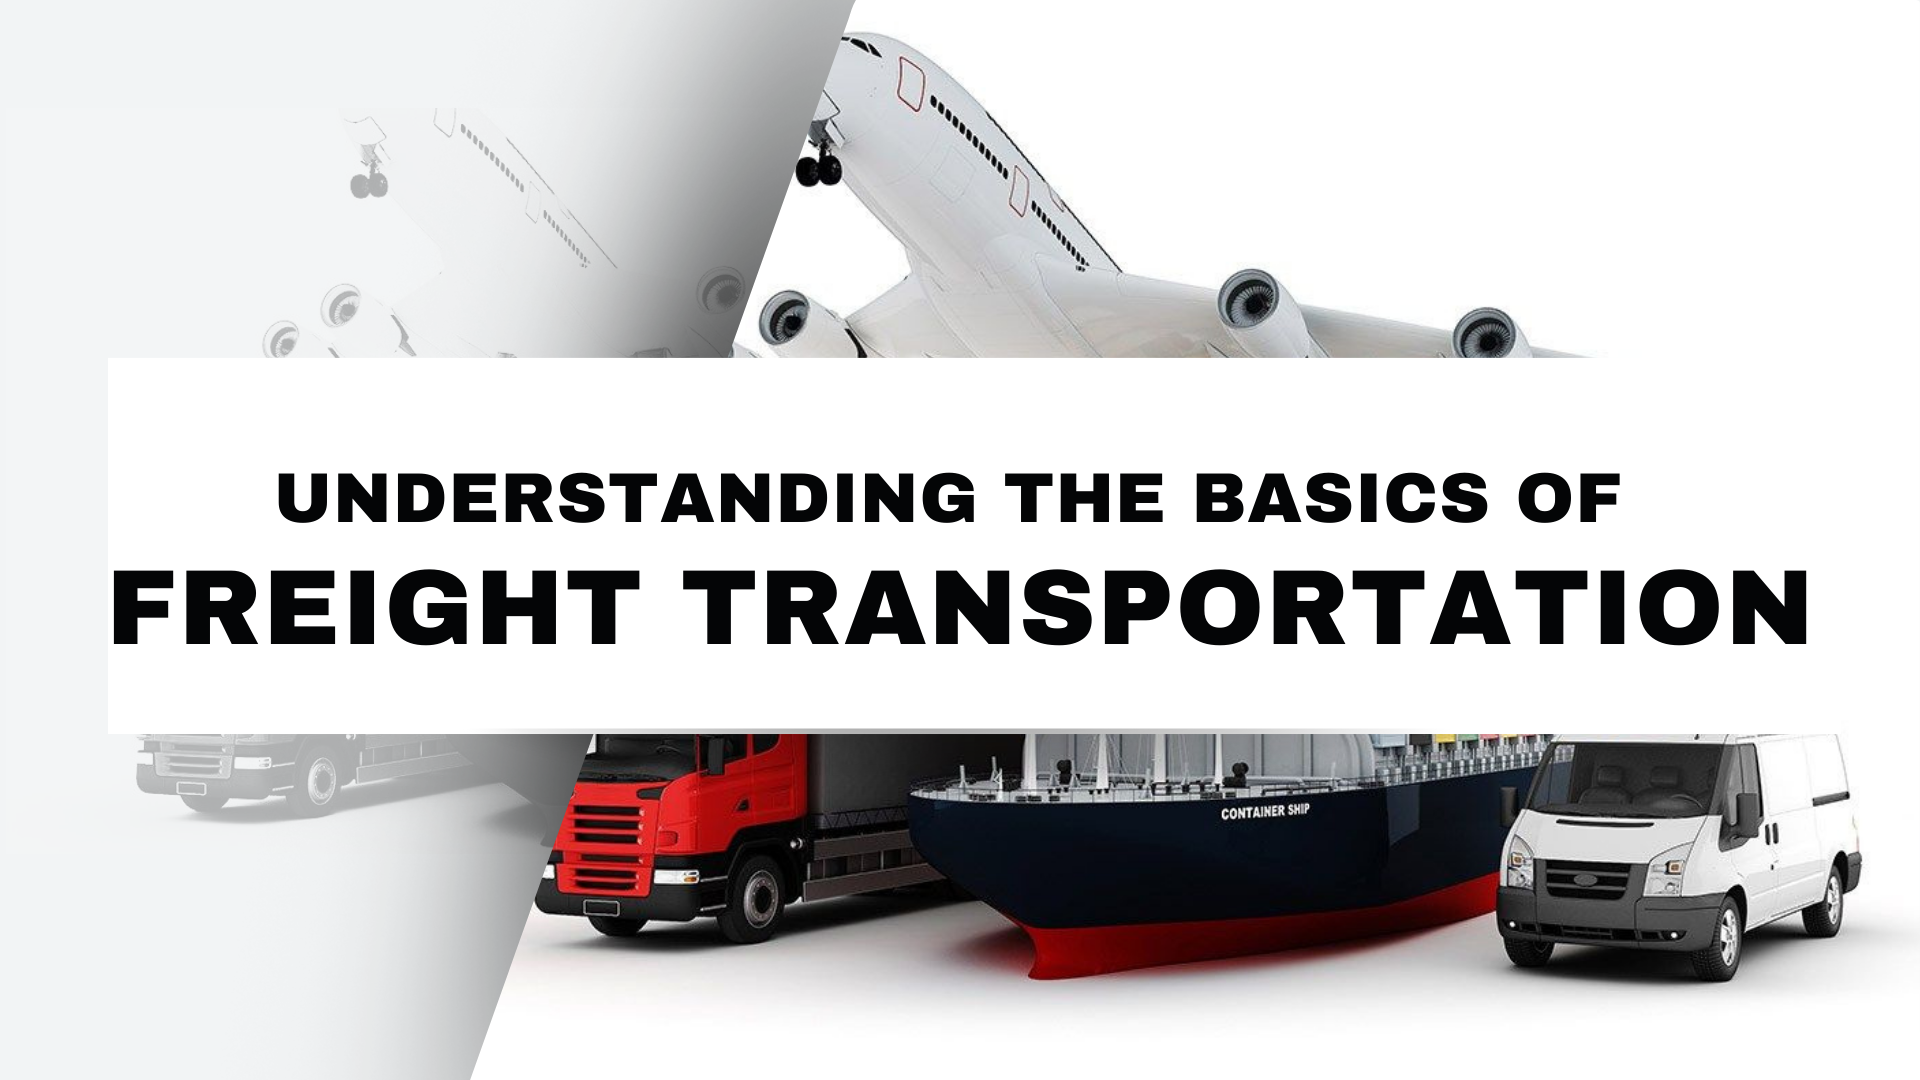 a poster for understanding the basics of freight transportation